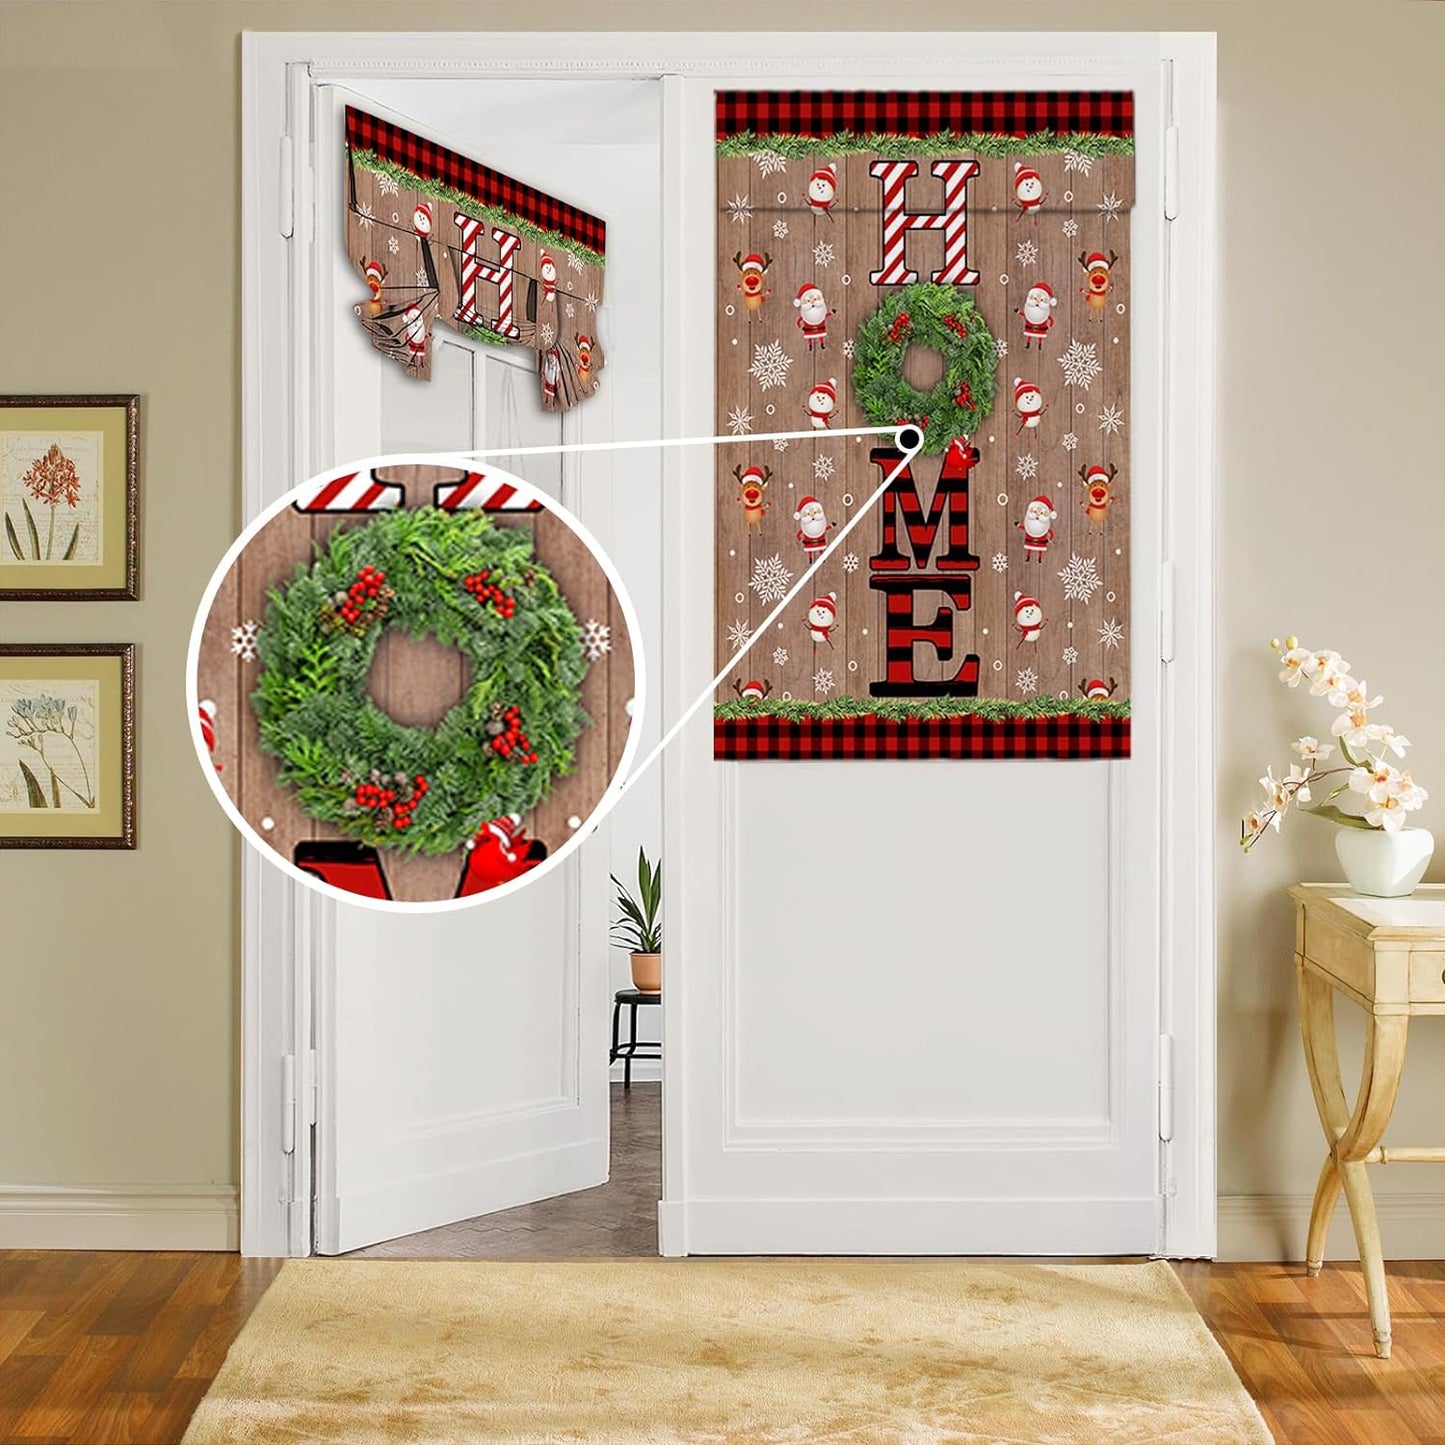 BEMIGO Door Curtains for Door Windows, Vintage Wooden Door Window Curtains for French Glass Door, Privacy Thermal Insulated Tie up Door Shades, Farmhouse Colorful Small Window Curtains 26 X 42 Inch  BEMIGO Red Brown 42.00" X 26.00" 